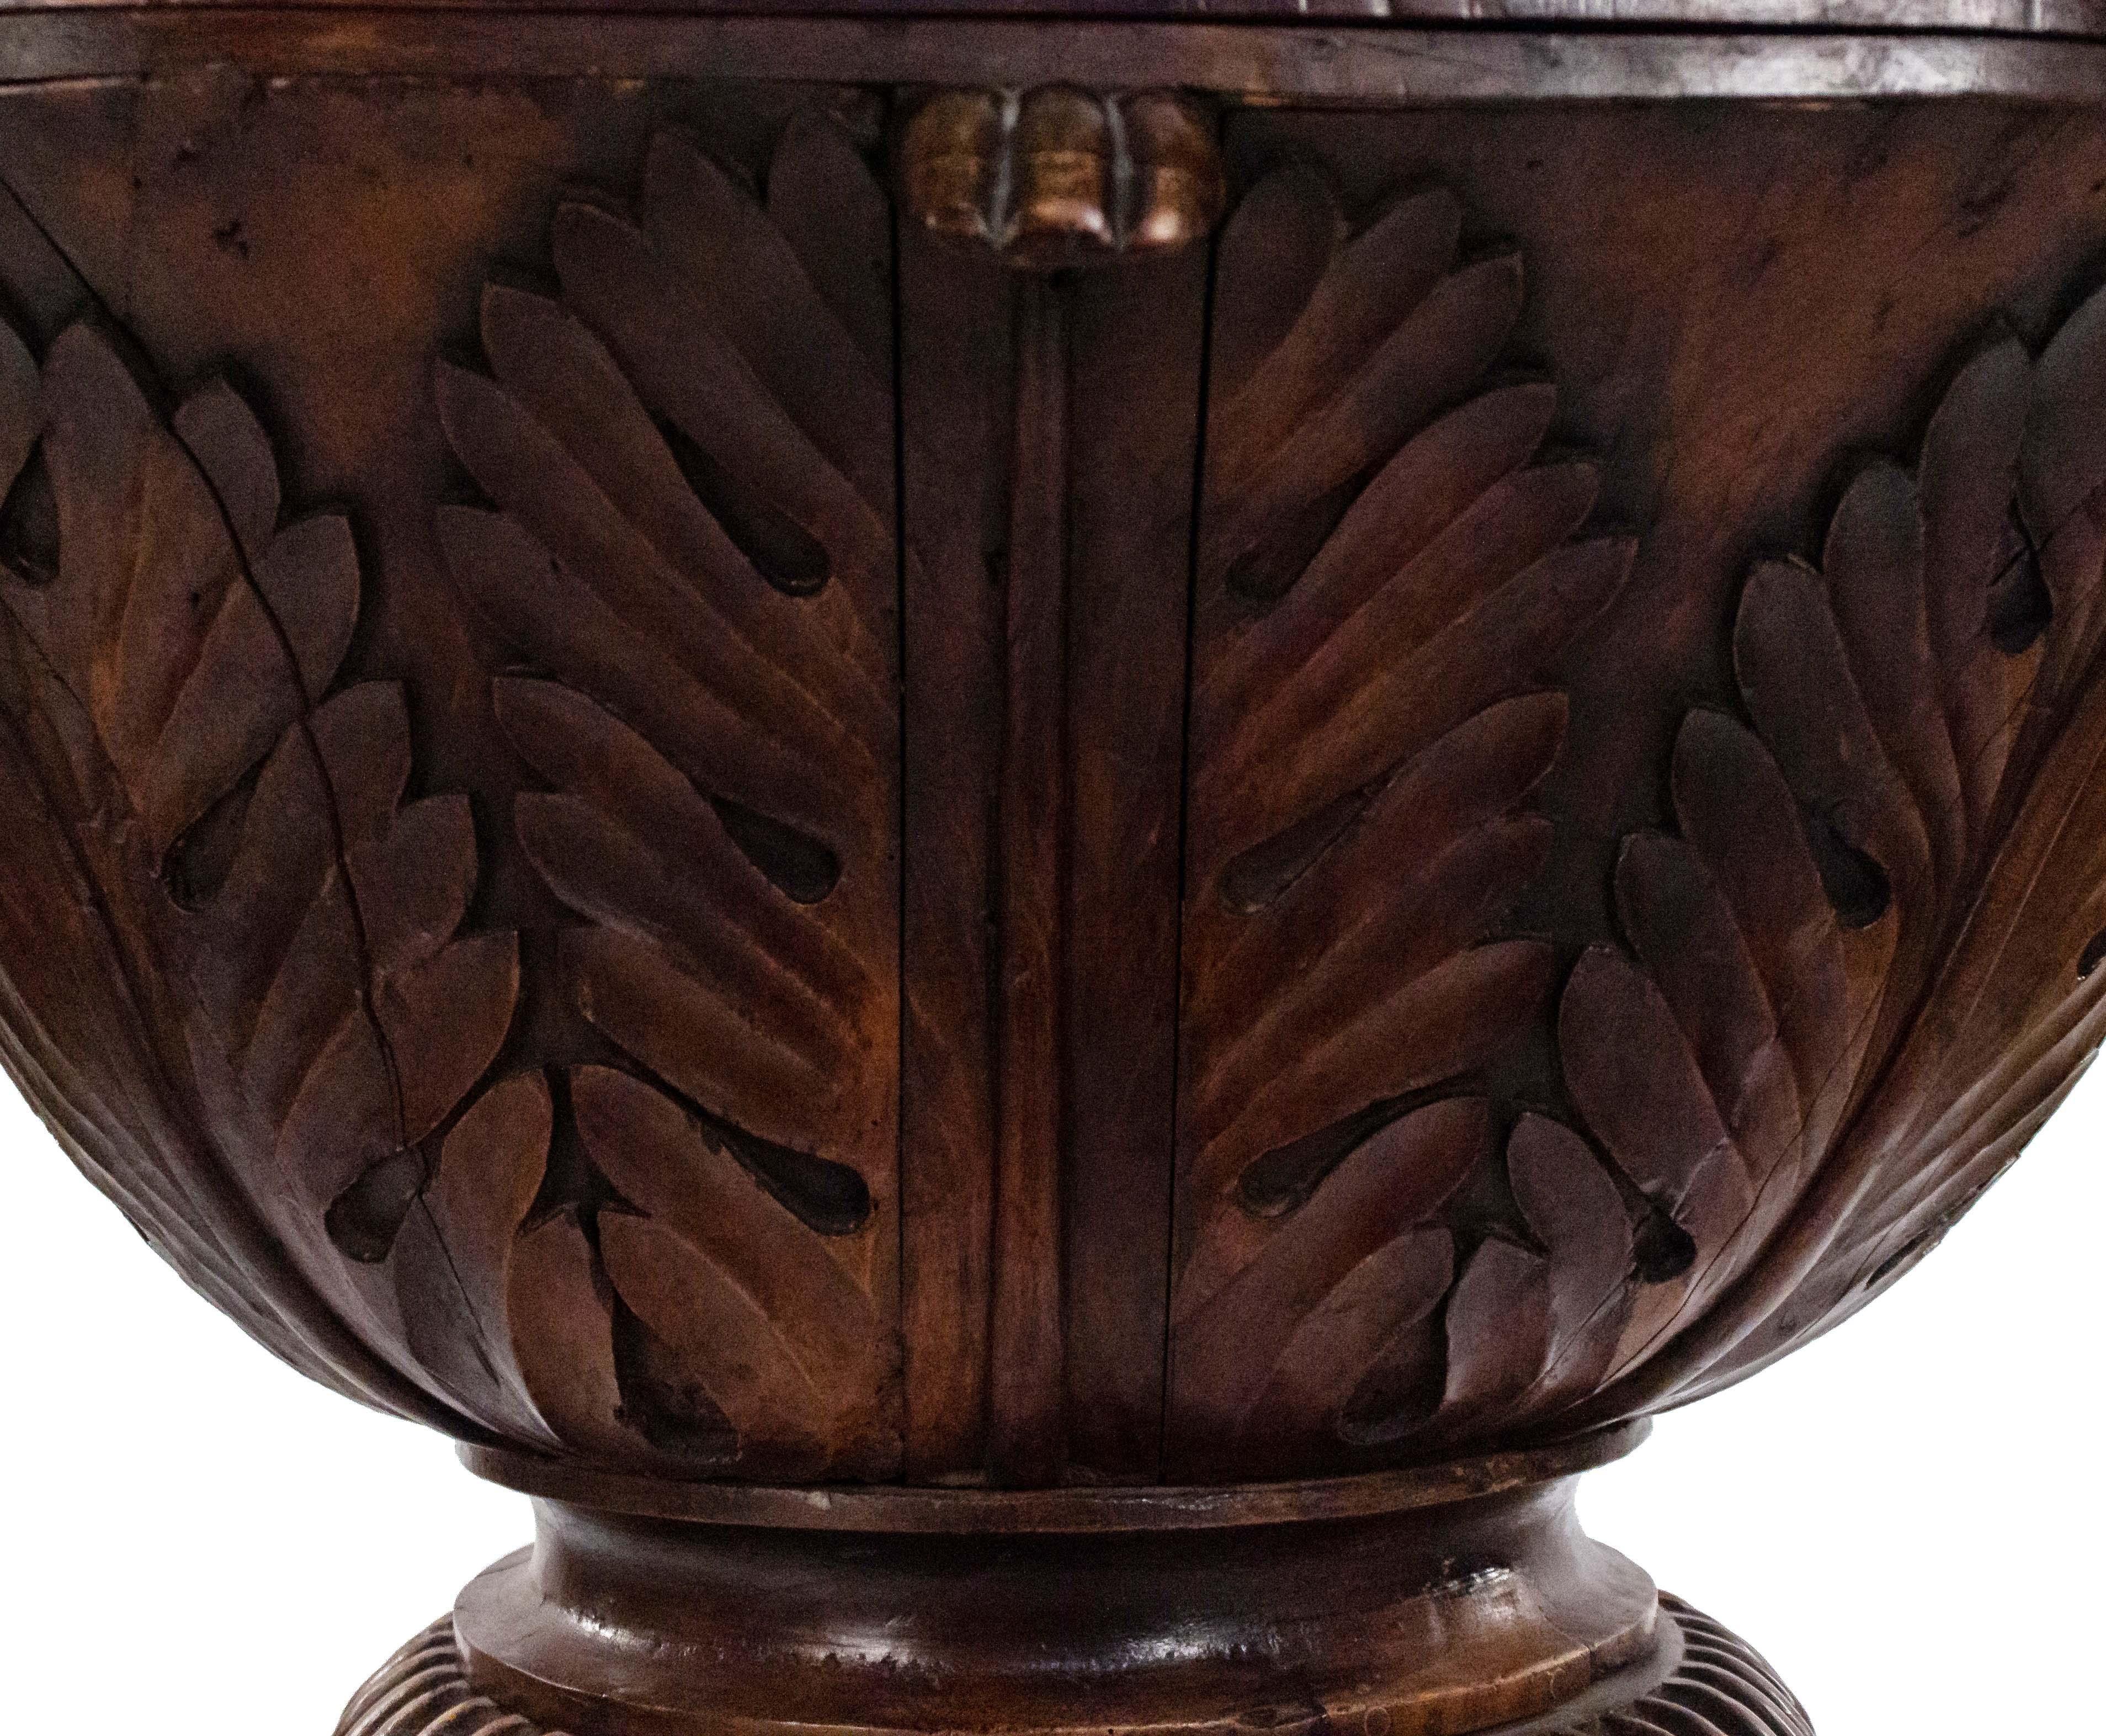 Monumental continental (19th century) carved walnut standing oval jardinière in the shape of a fluted cup with vegetal motifs. Interior lined in copper.